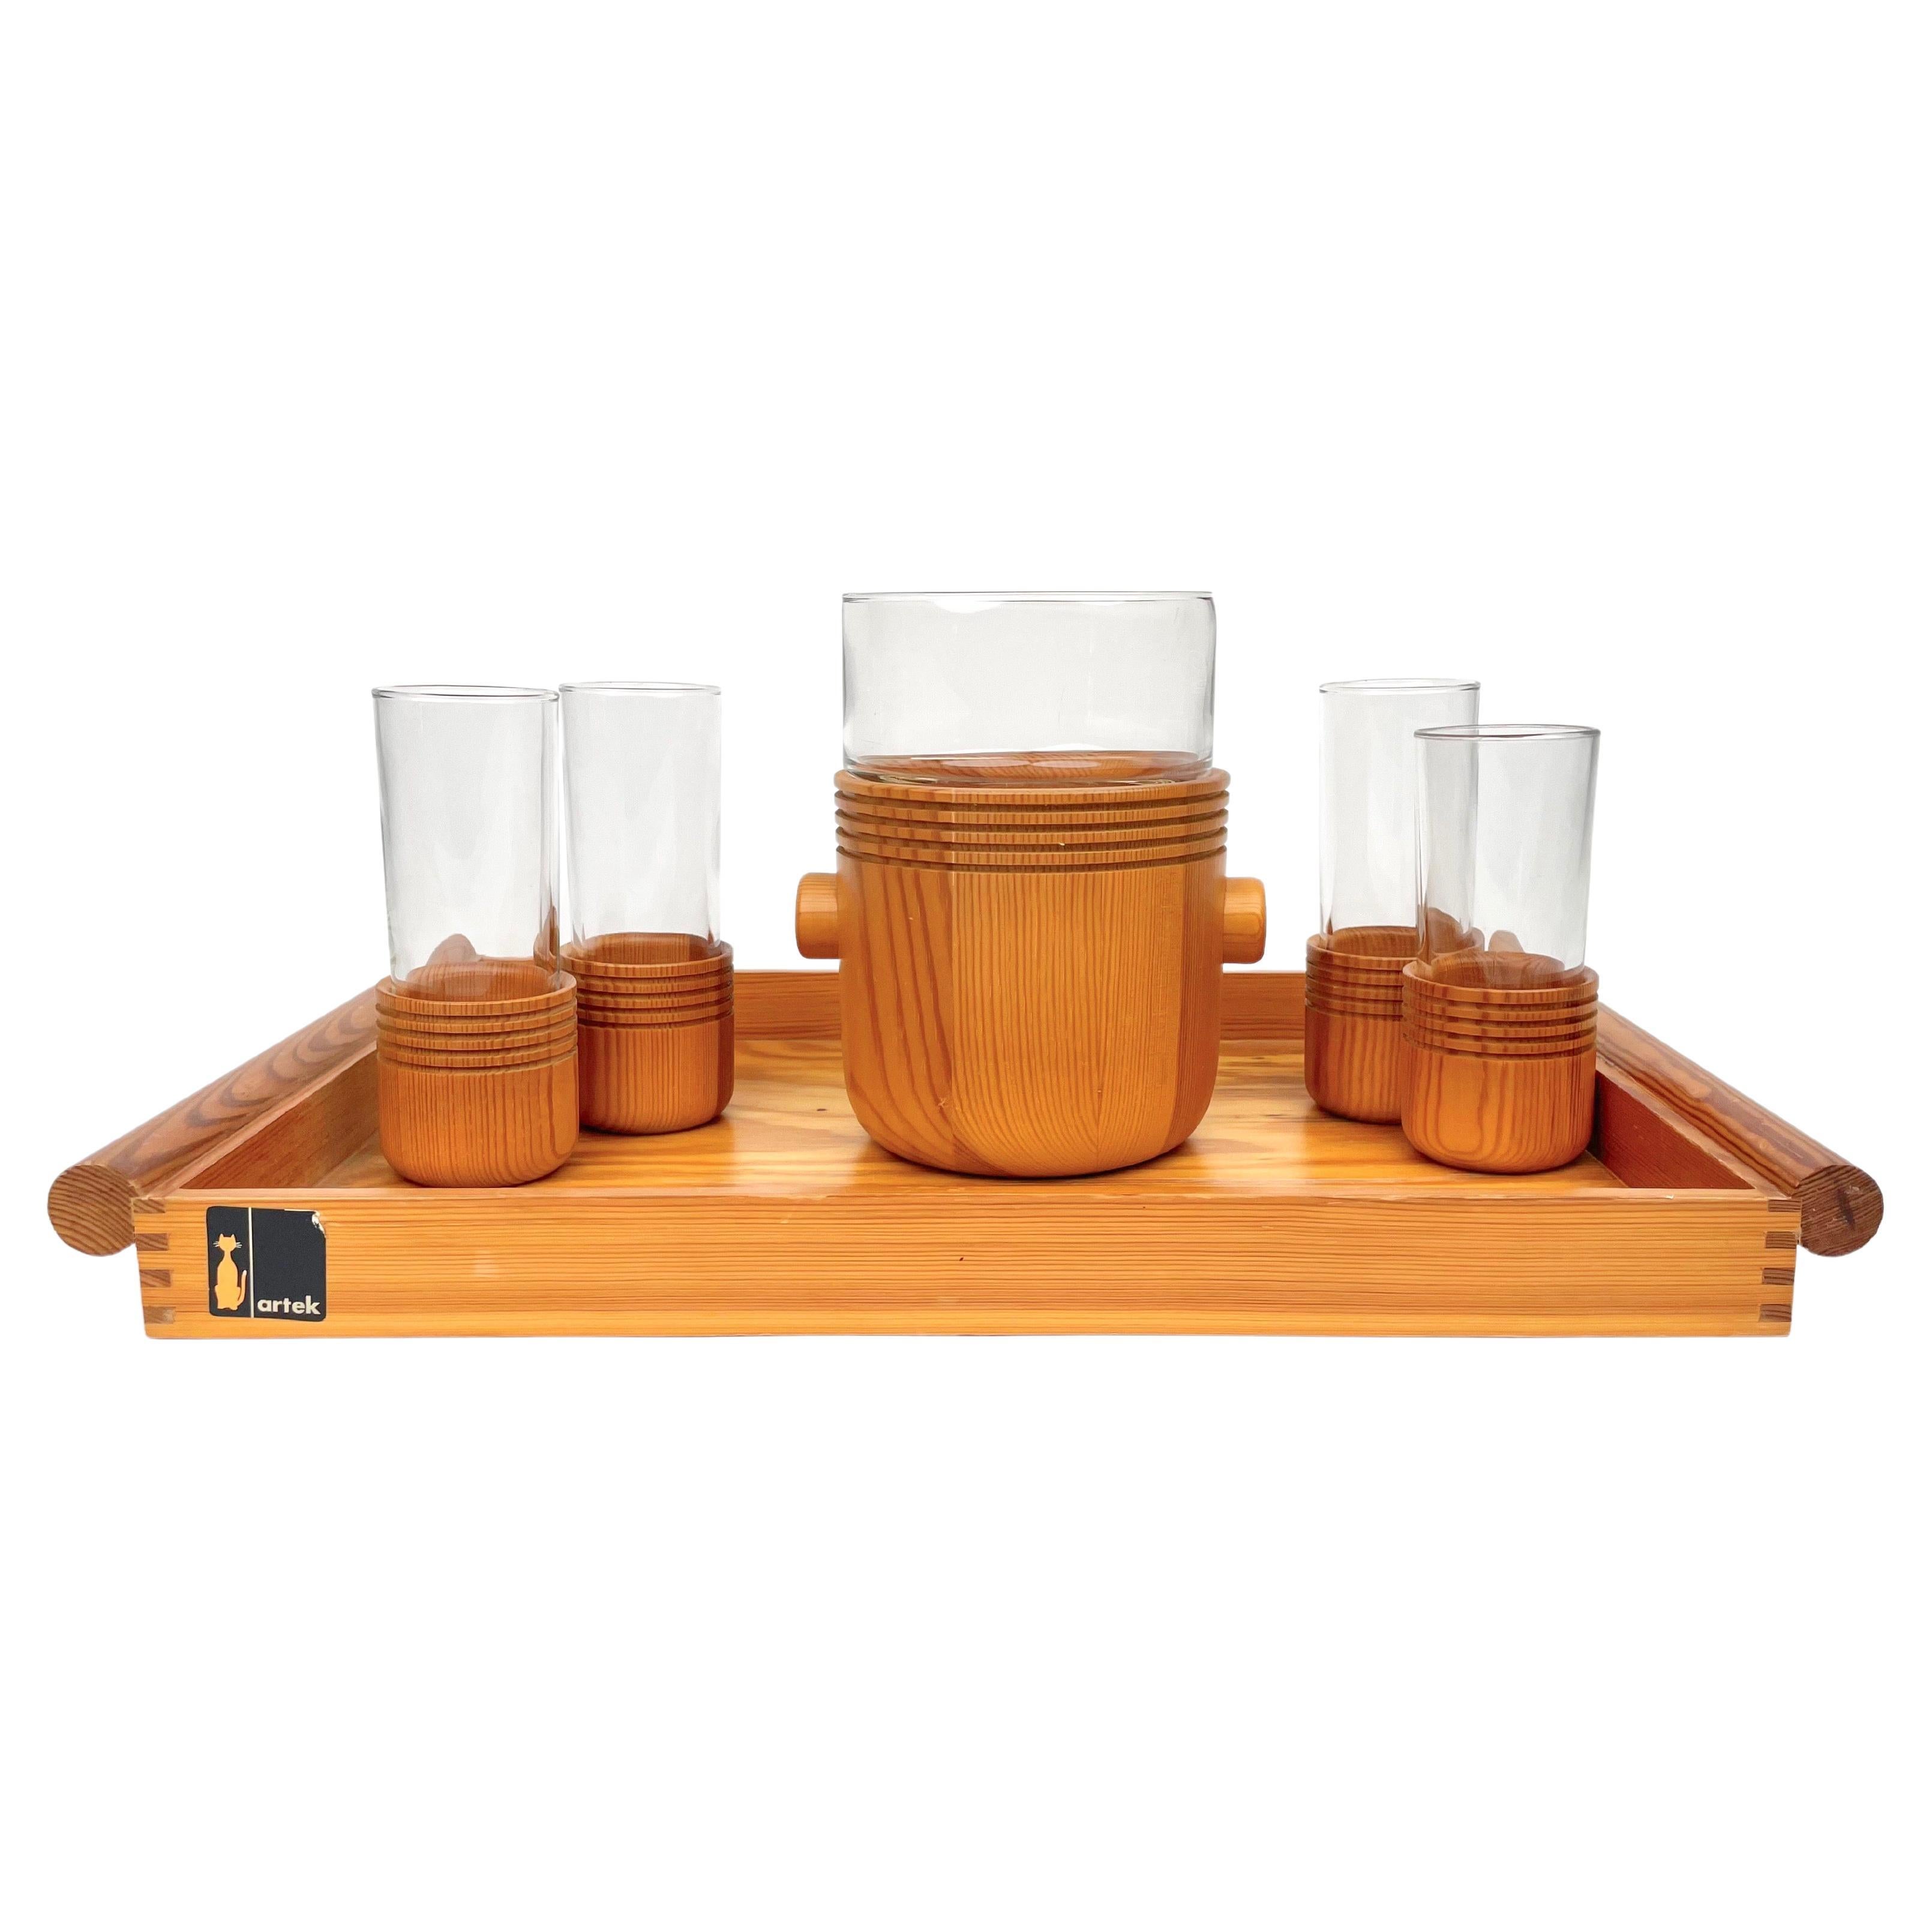 Serving Set of Tray Ice Bucket and Glasses by Alvar Aalto for Artek, Italy 1960s